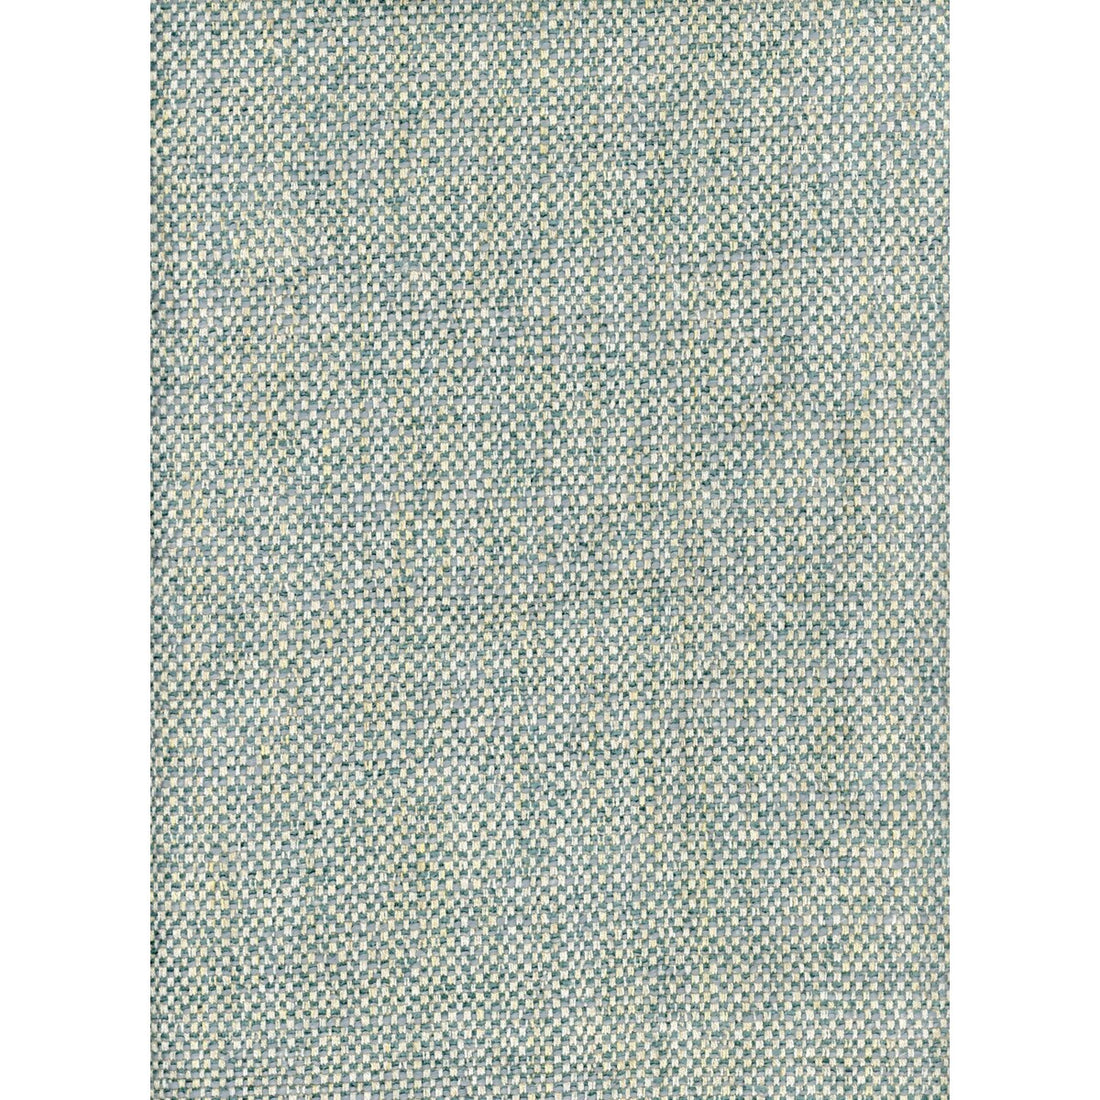 Paraggi fabric in muscari color - pattern AM100299.511.0 - by Kravet Couture in the Andrew Martin Portofino collection